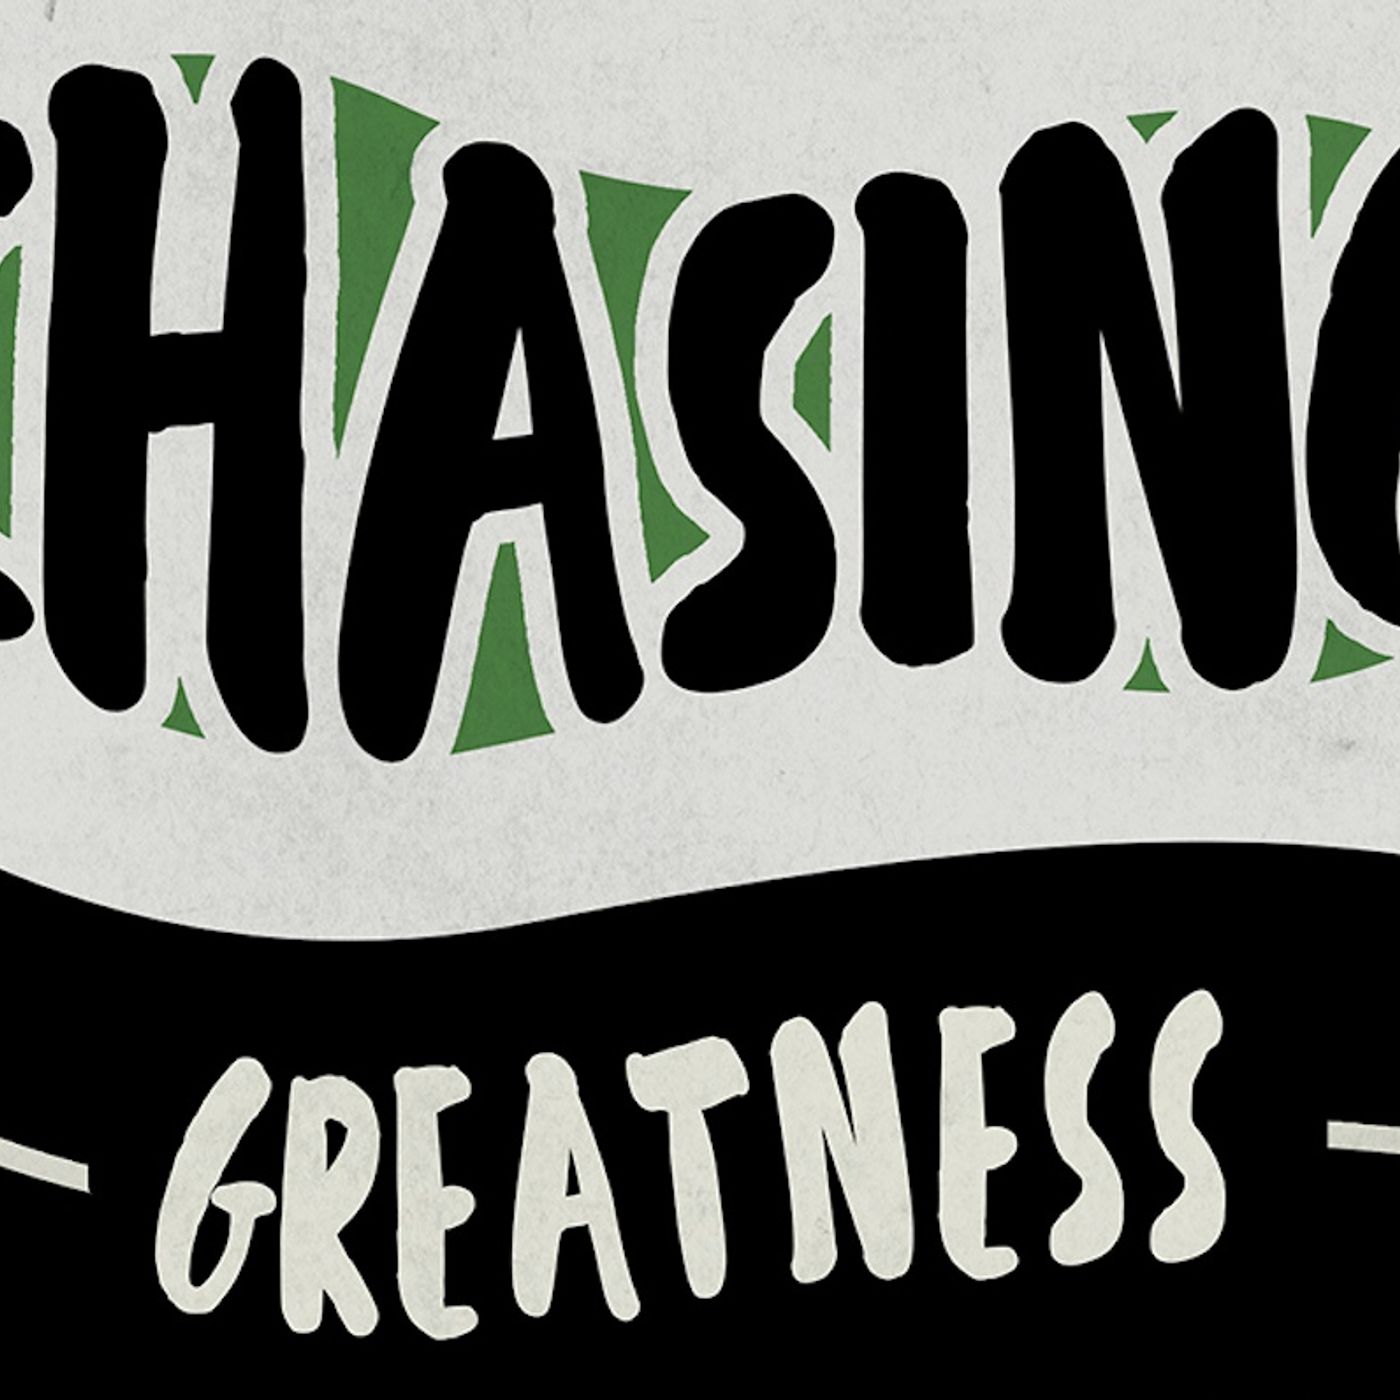 136: How teachers and runners chase greatness